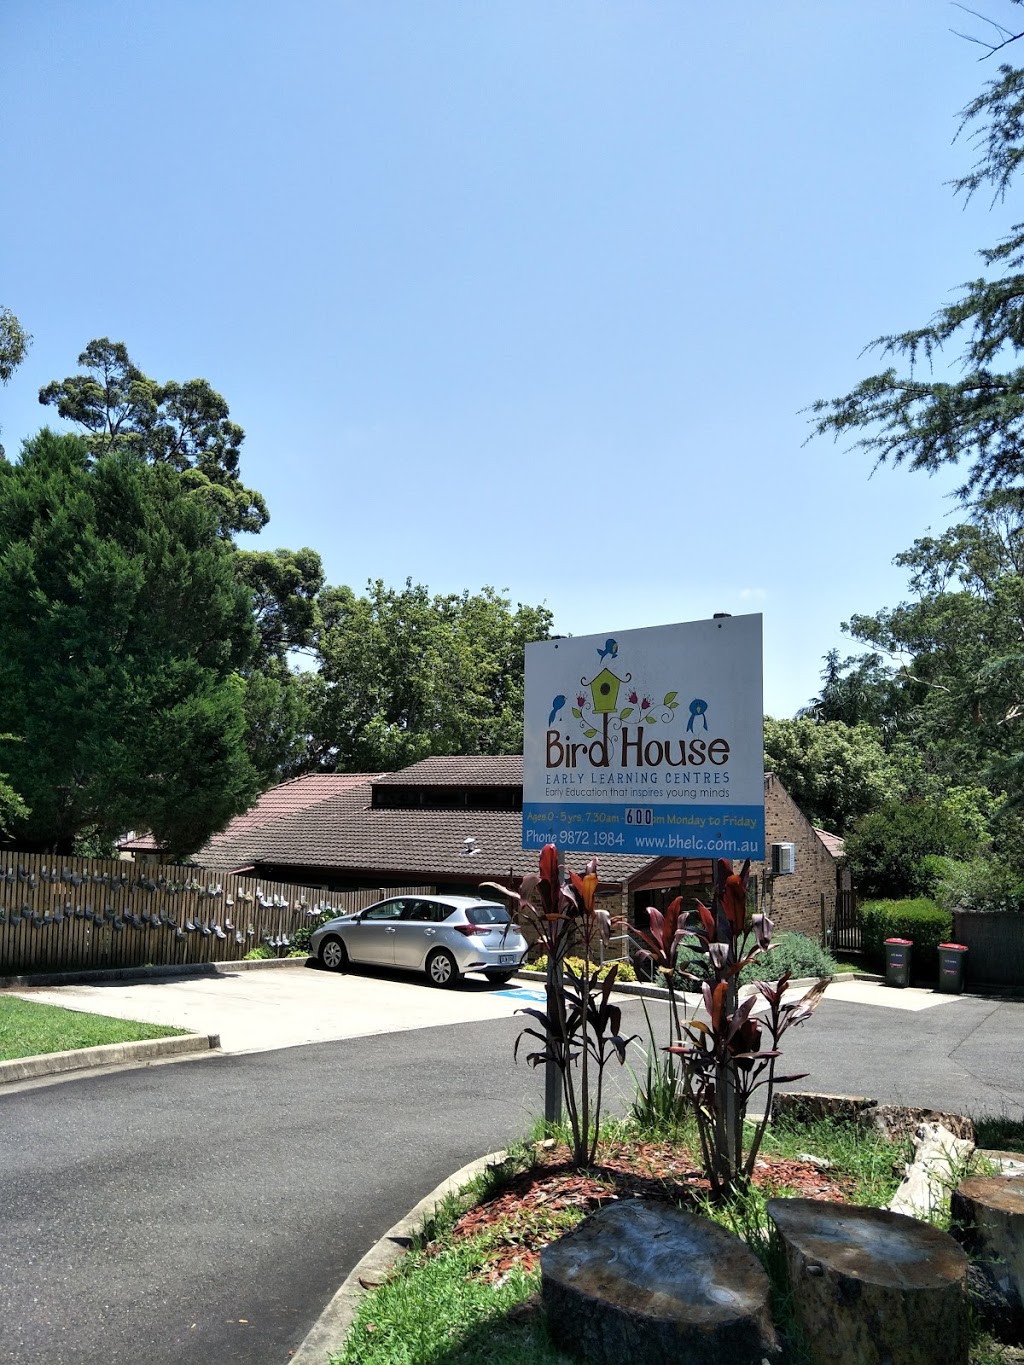 Bird House Early Learning Centre – West Pennant Hills | school | 4-6 Leigh Pl, West Pennant Hills NSW 2125, Australia | 138230 OR +61 138230